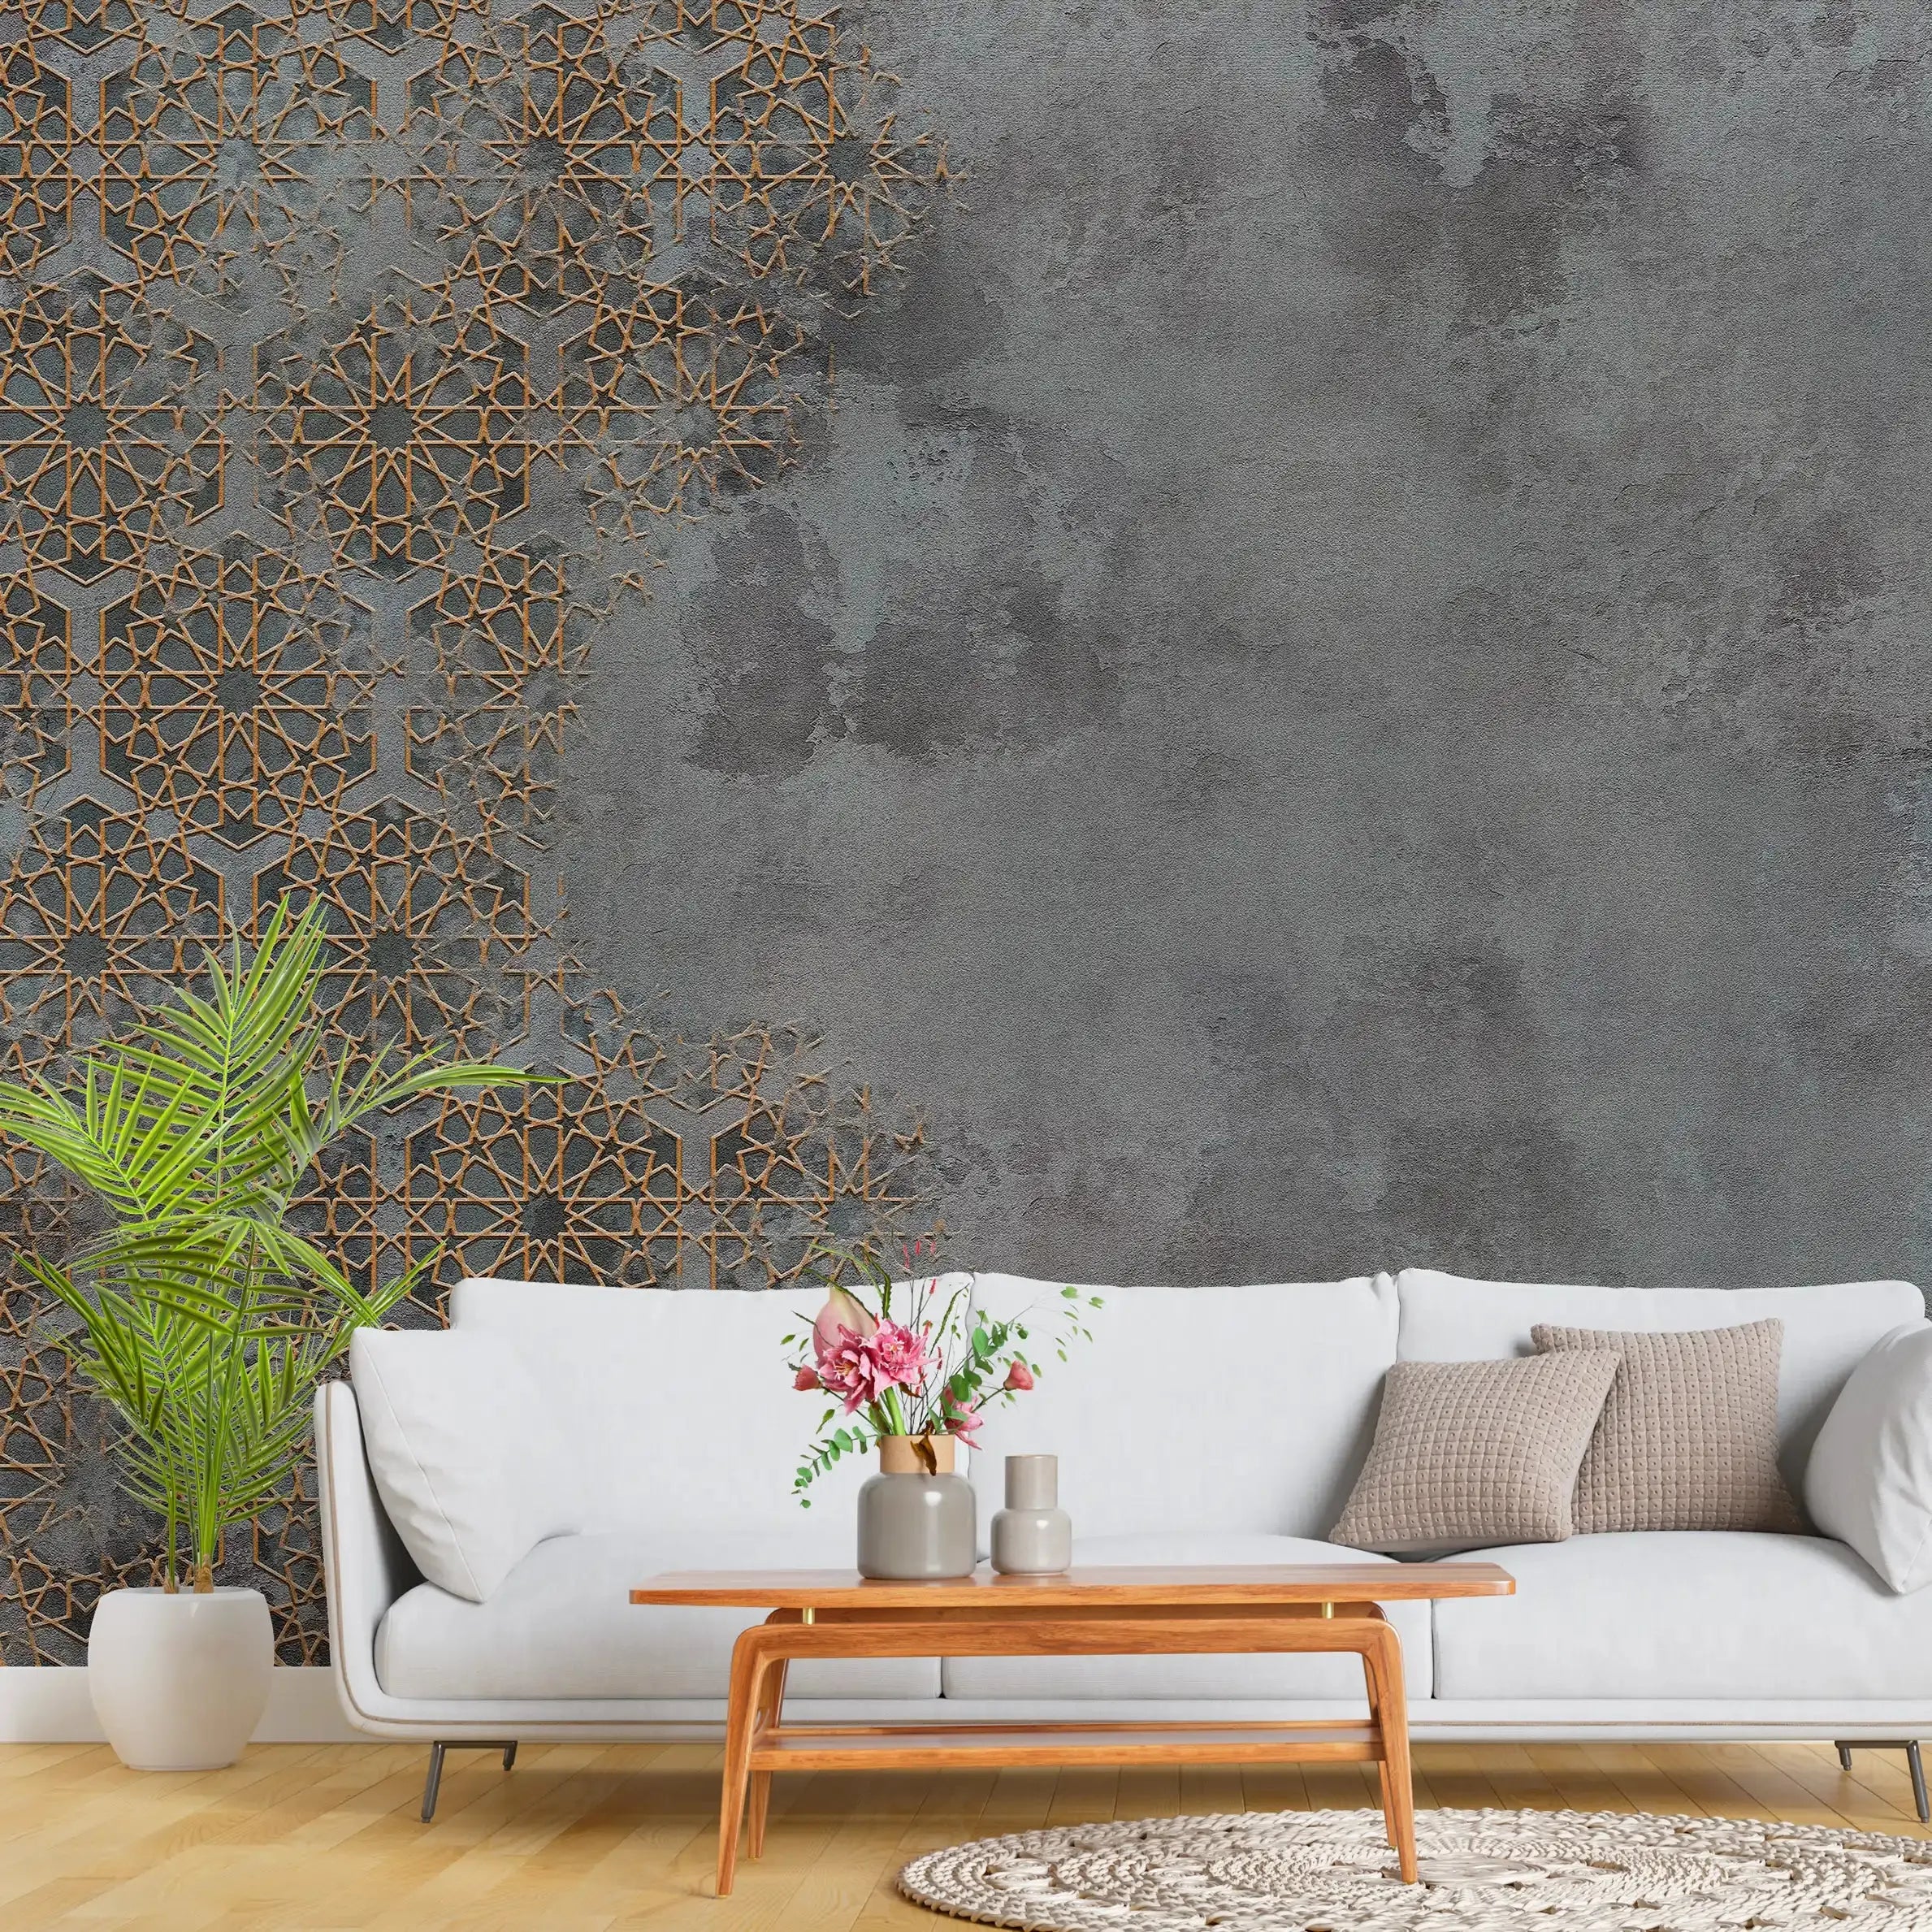 3068-A / Elegant Floral Abstract Peel and Stick Wallpaper with Gold Border - Perfect for Modern Room Deco - Artevella